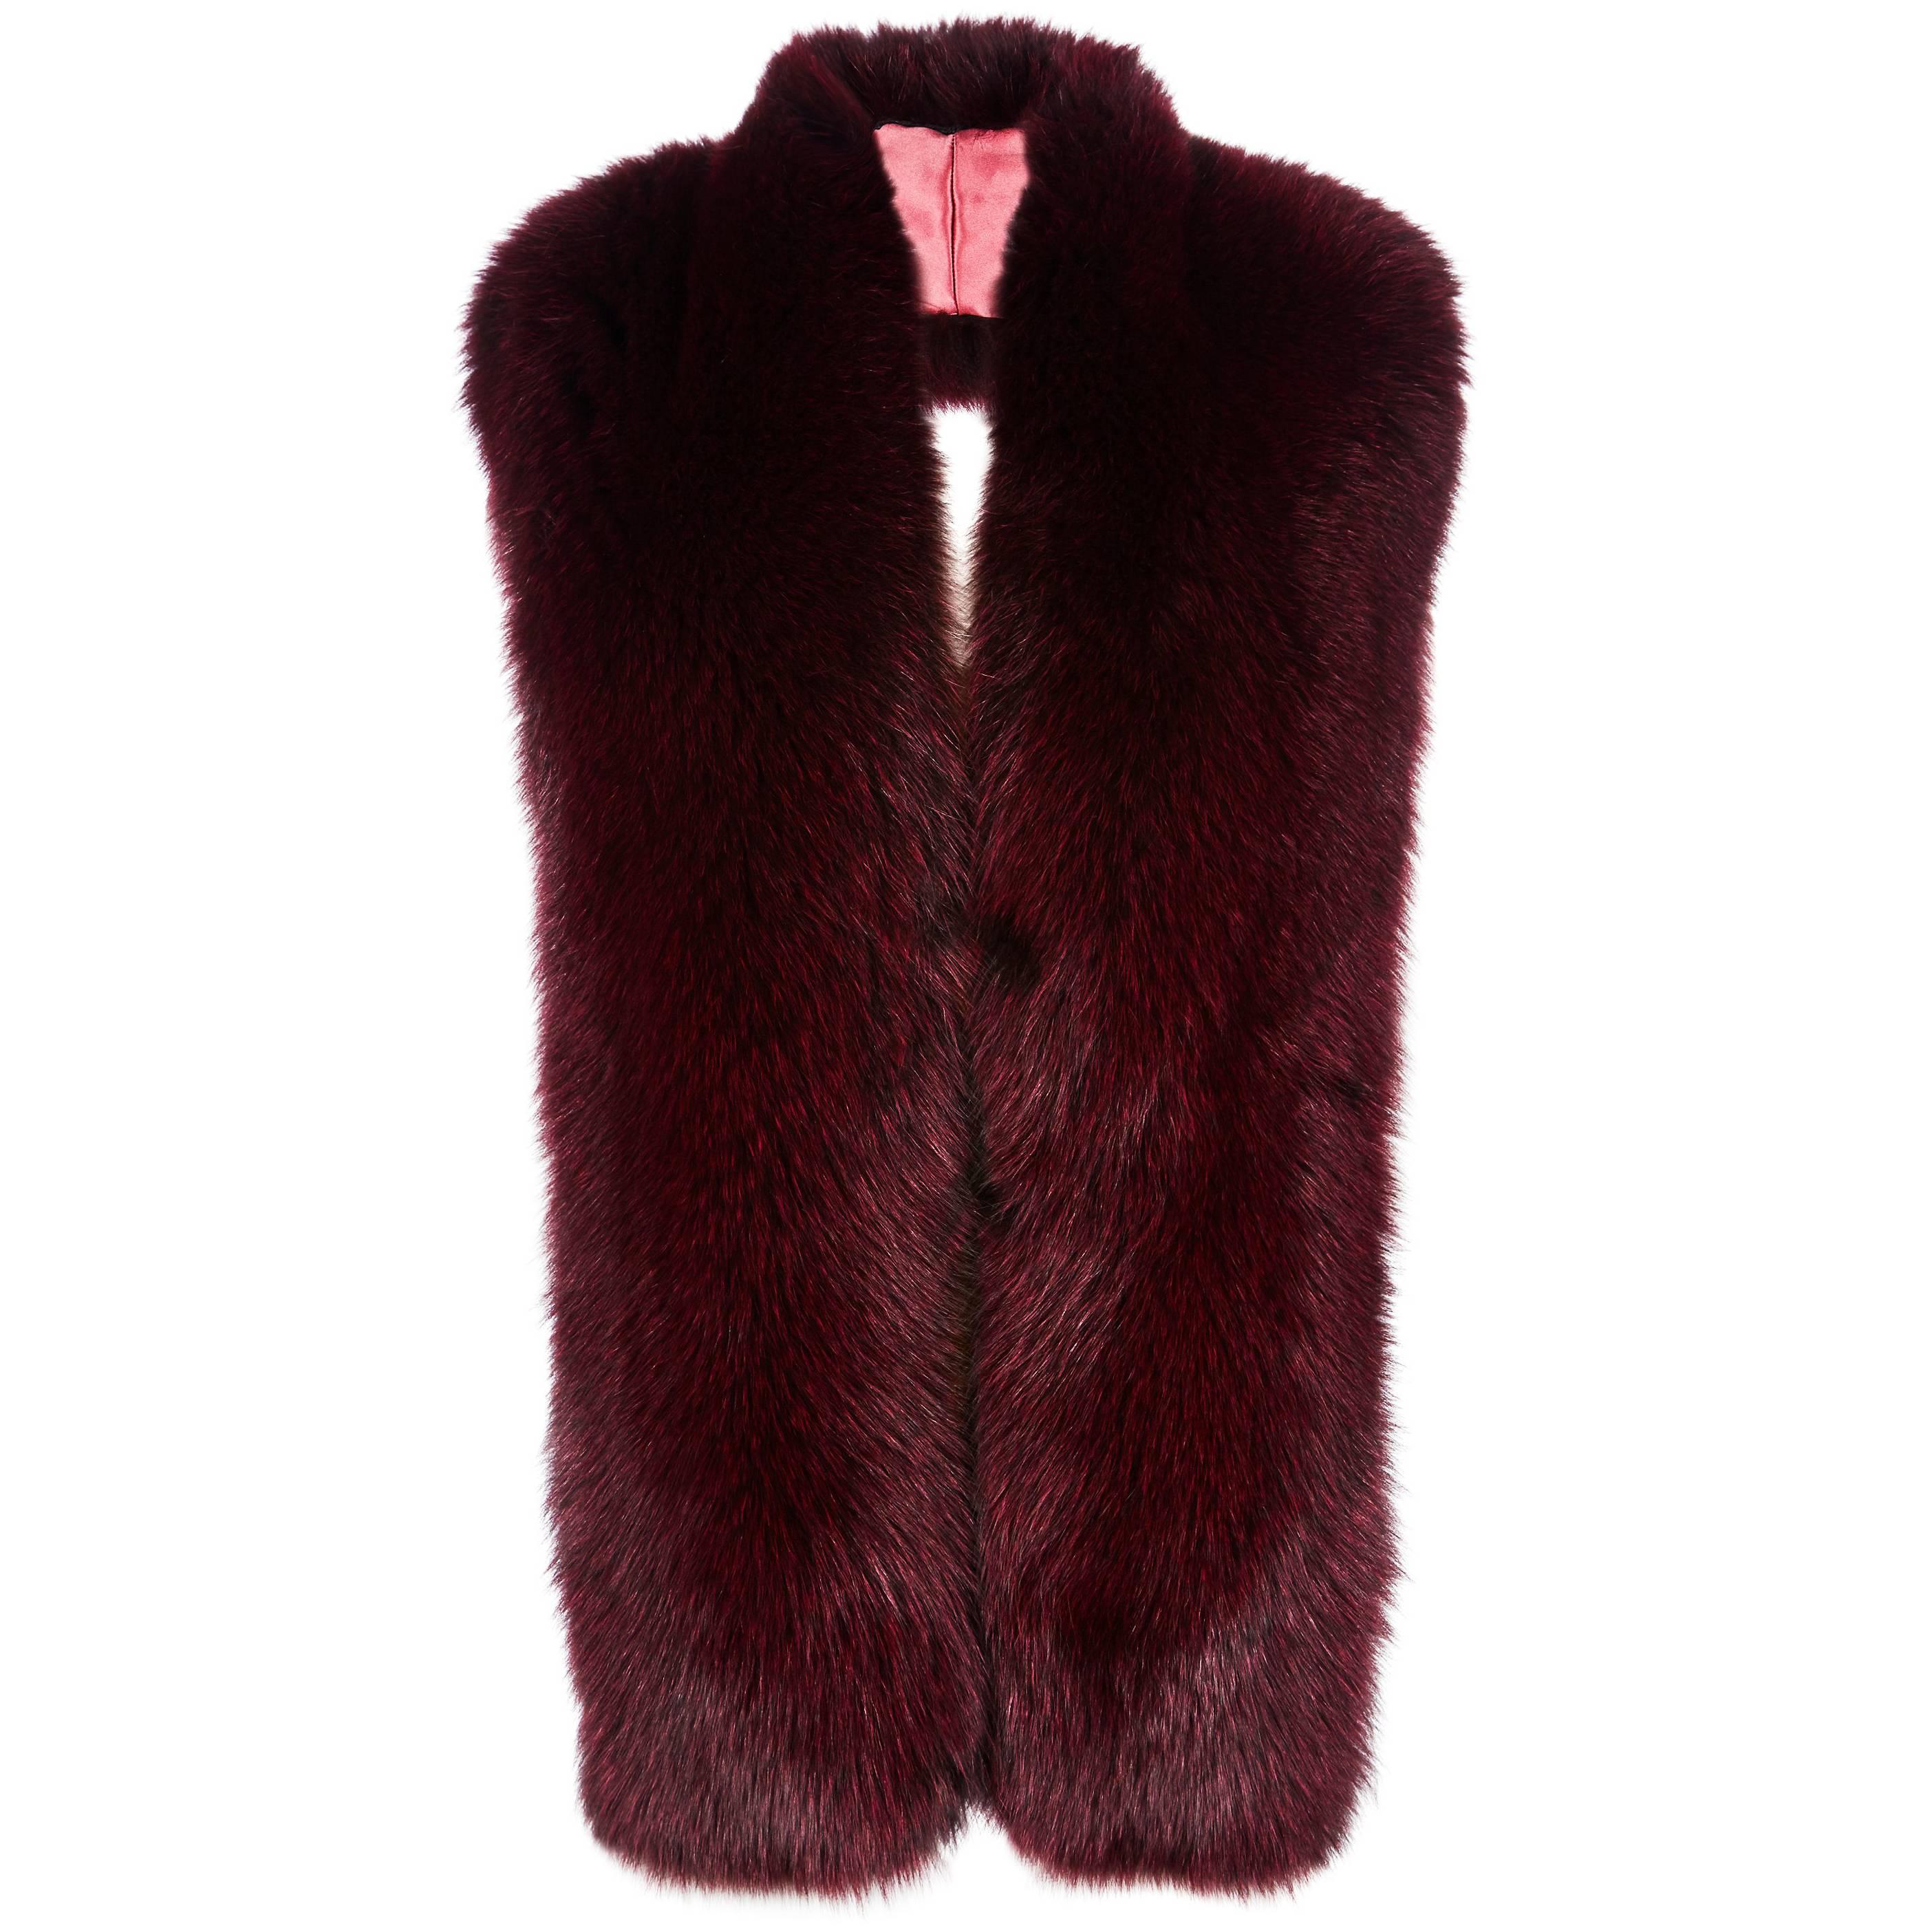 Verheyen London Legacy Stole Collar in Garnet Burgundy Fox Fur - Brand New 

The Legacy Stole is Verheyen London’s versatile design to be worn from day to night. Crafted in the finest dyed fox fur and lined in coloured silk satin.  A structured